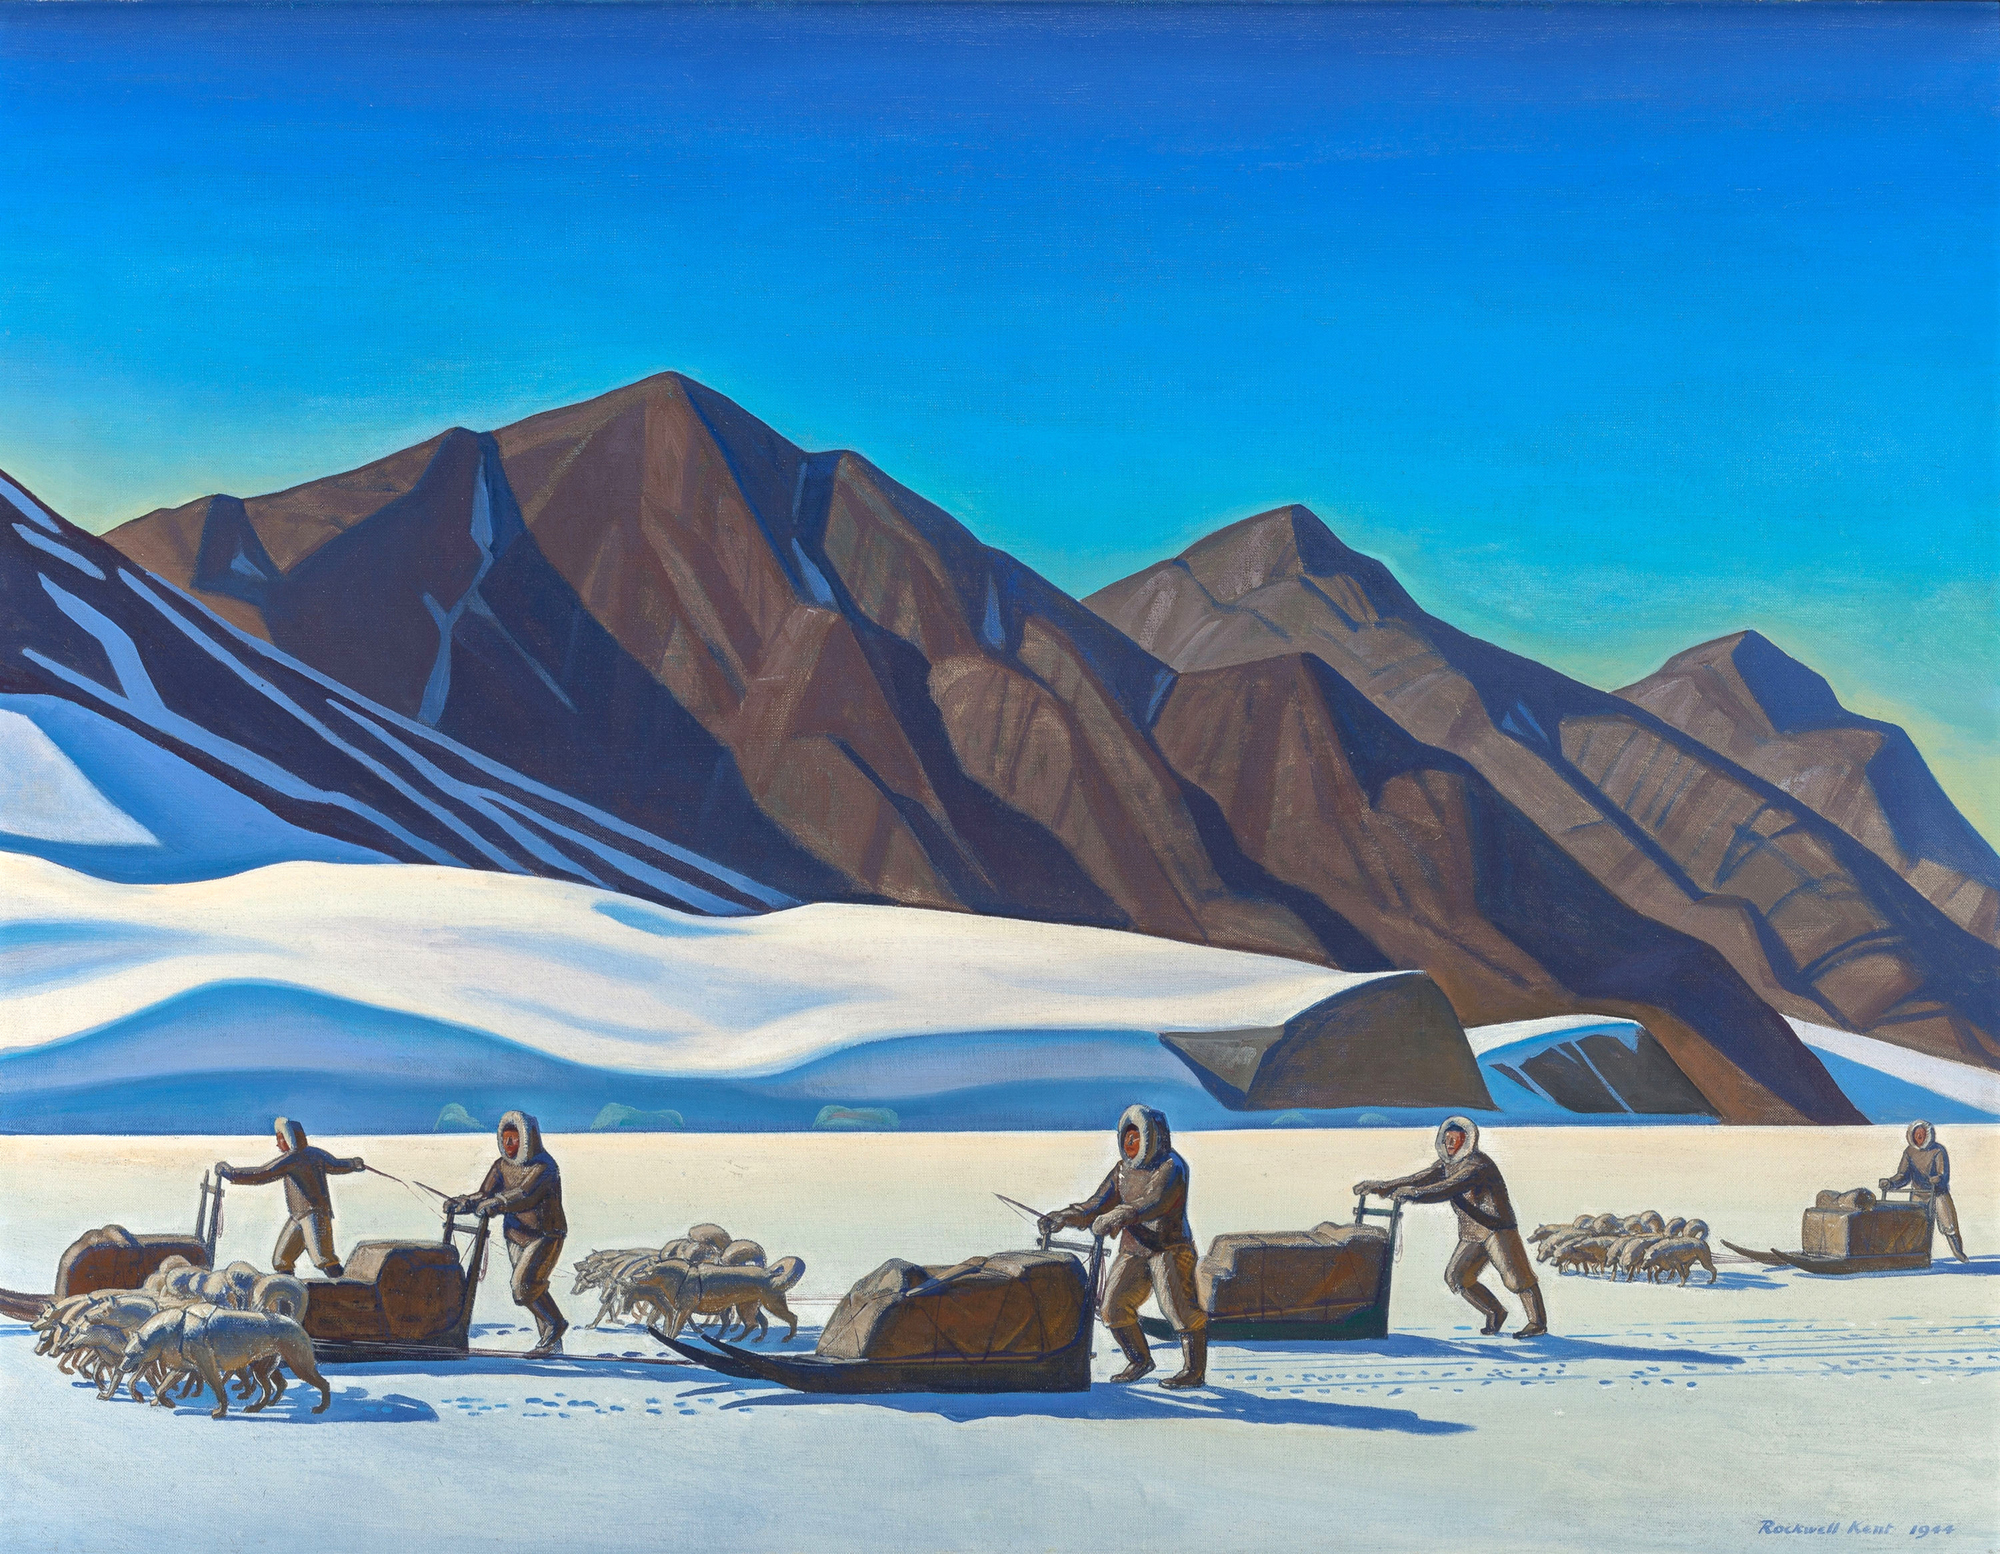 Rockwell Kent (American, 1882-1971), ‘Polar Expedition,’ 1944, oil on canvas, sold for $605,000, an auction record for the artist. Heritage Auctions images